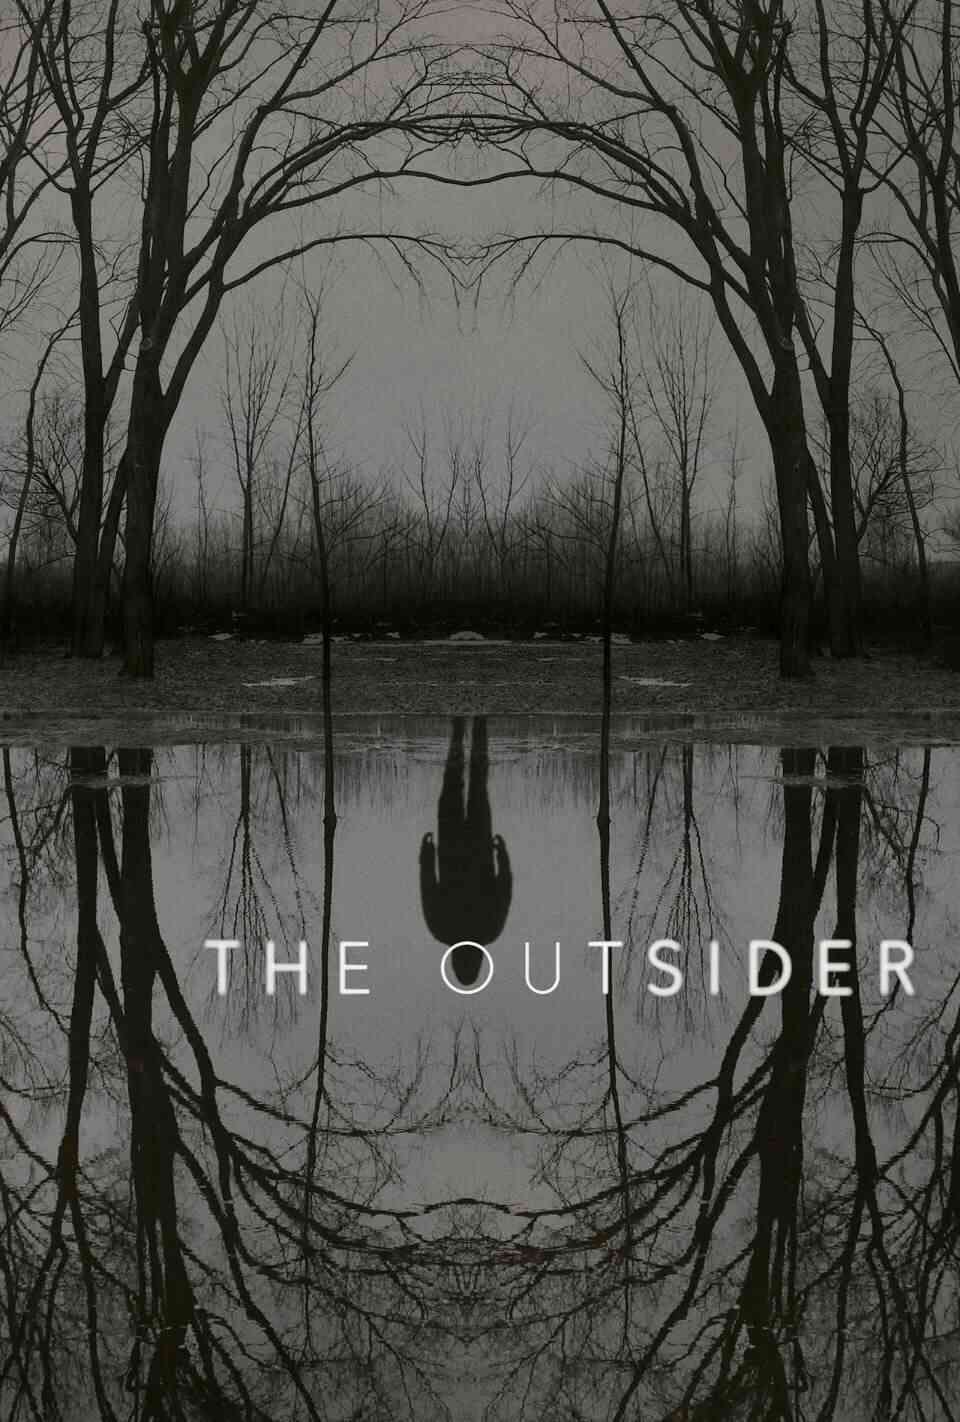 Read The Outsider screenplay.